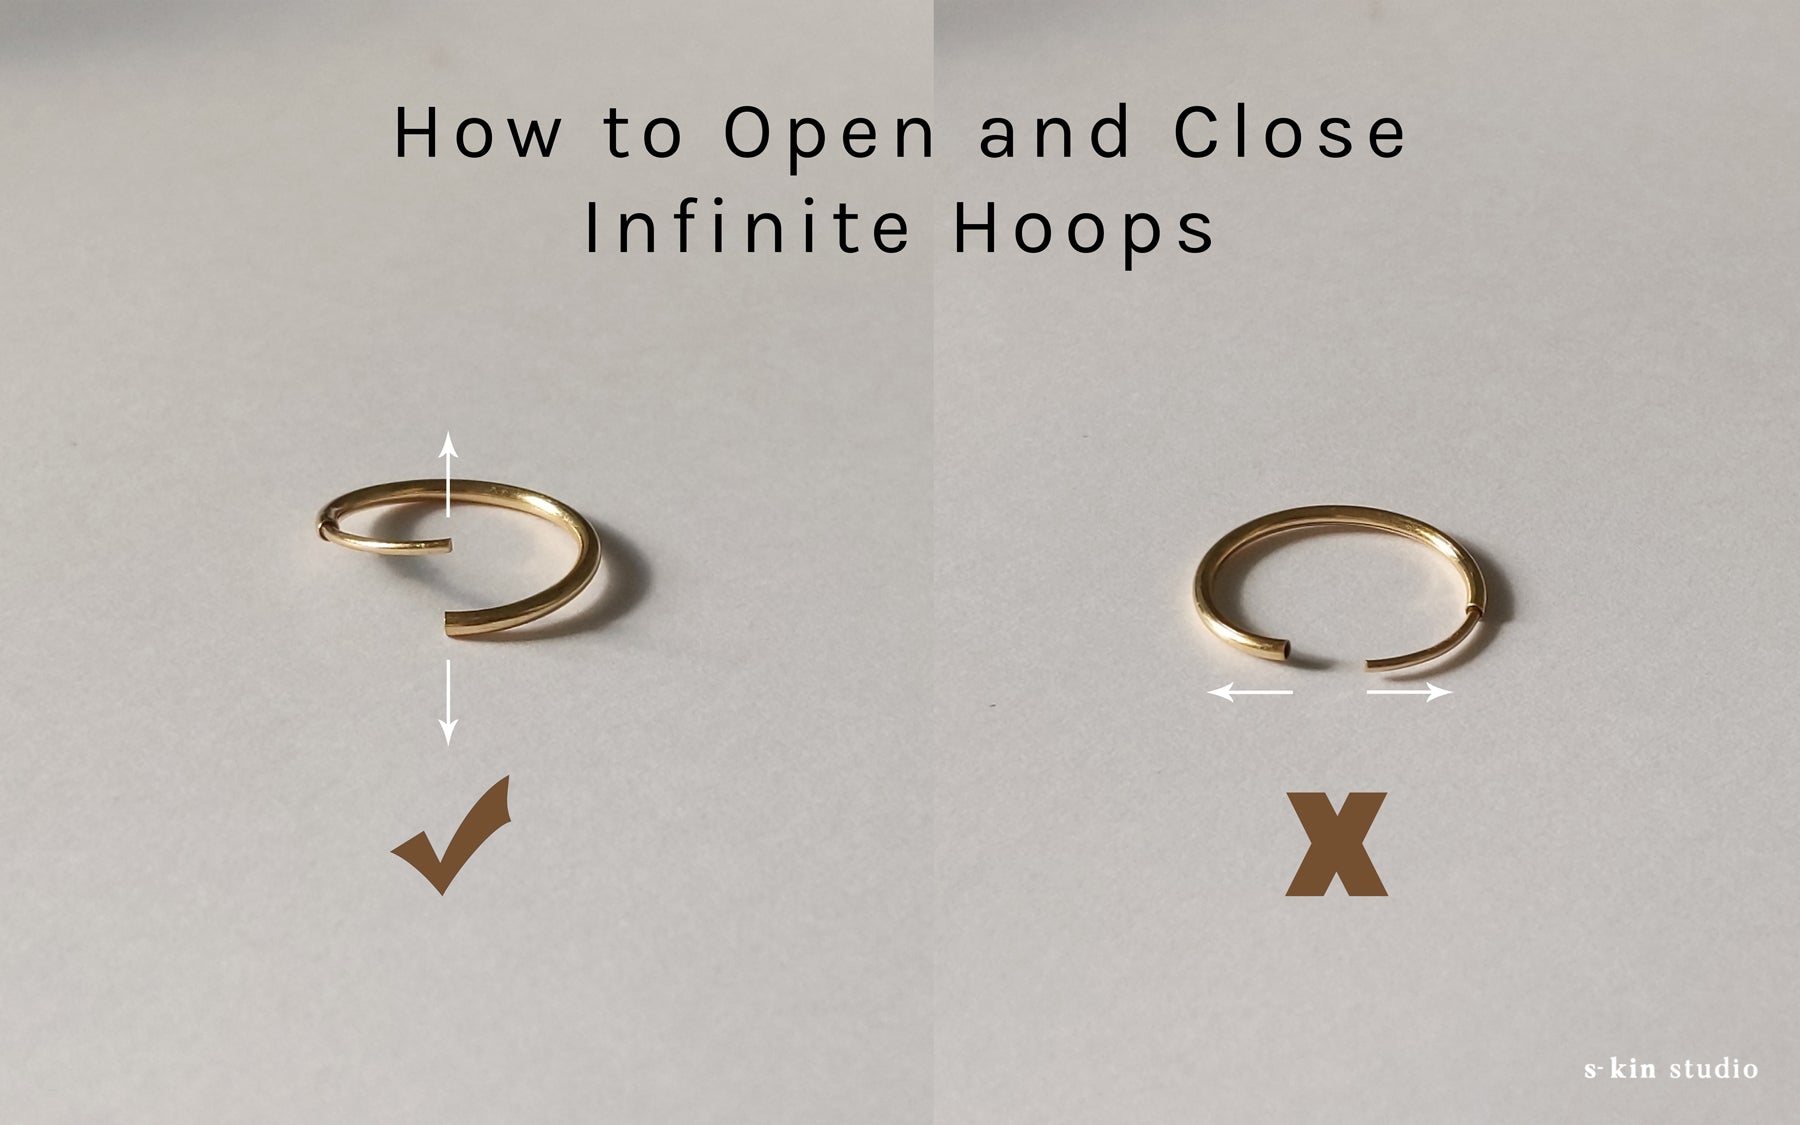 How to Open and Close Infinite Hoops